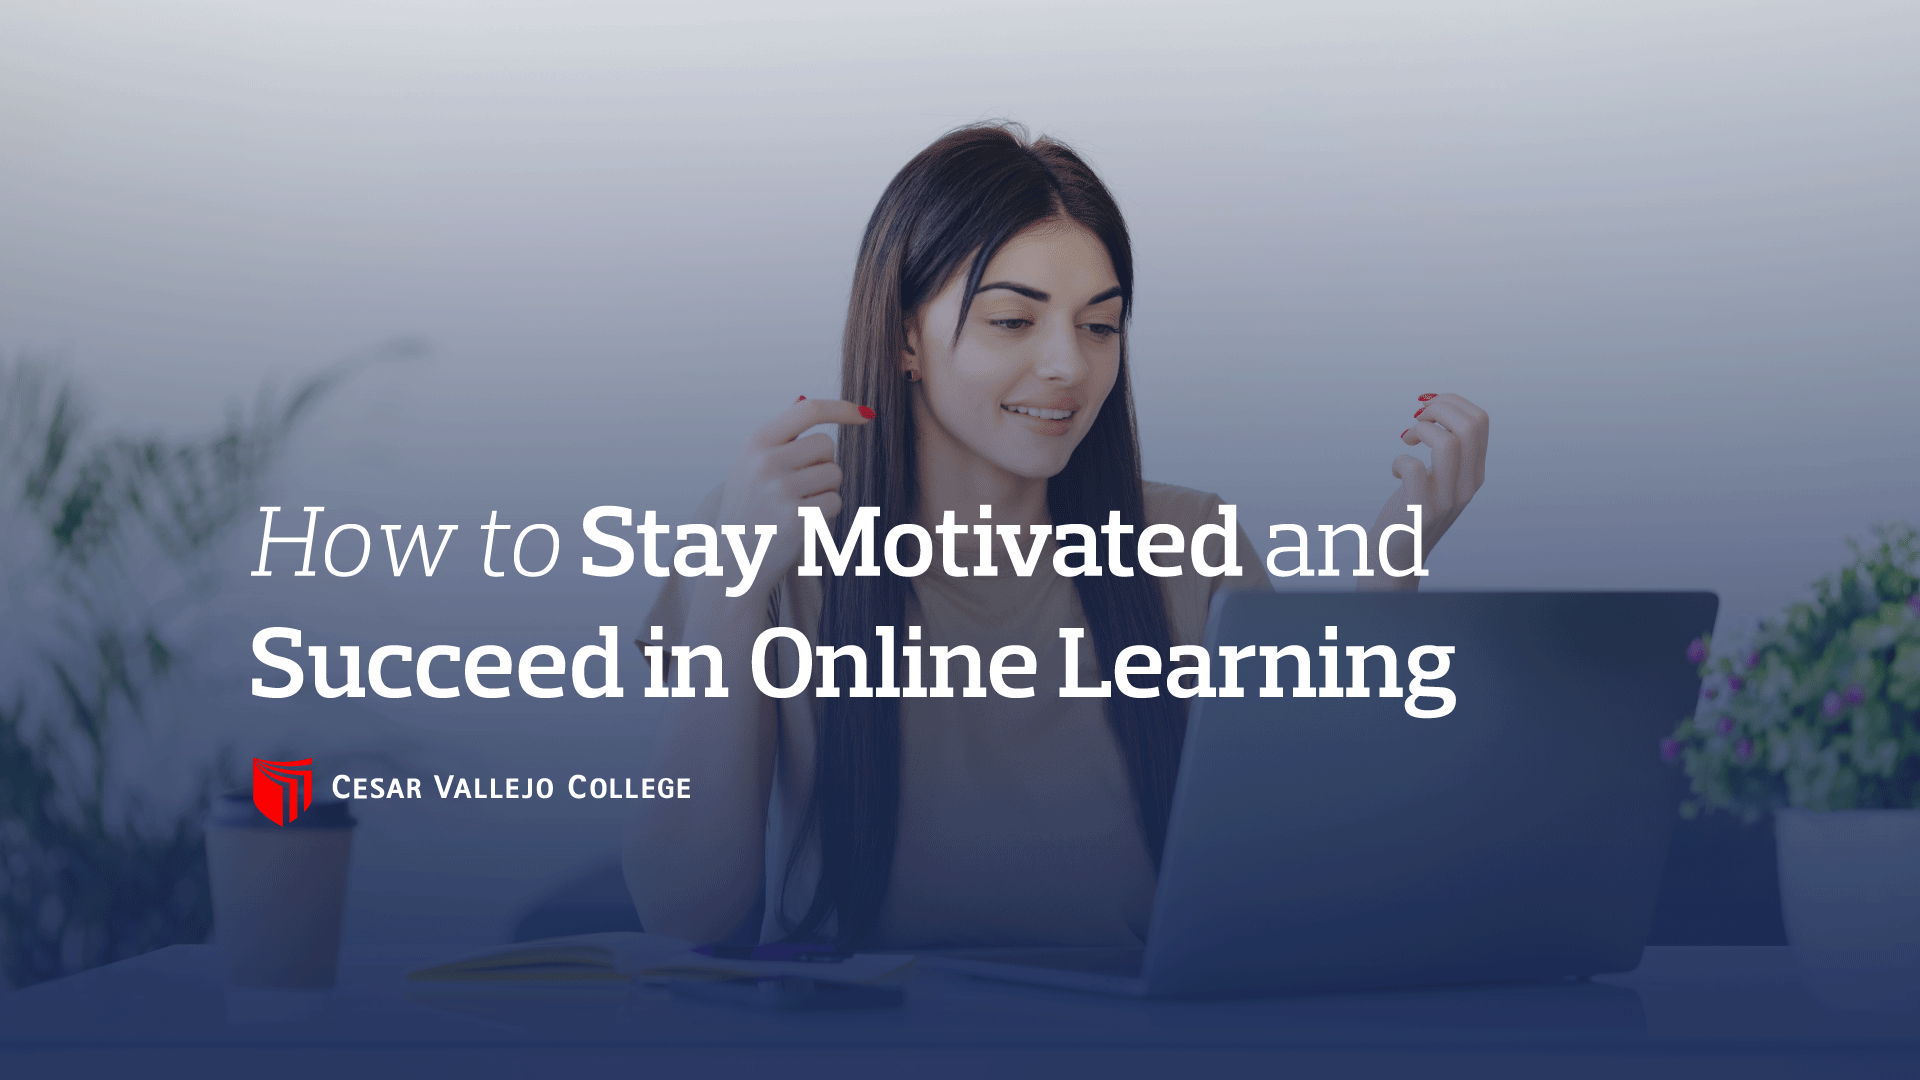 How to Stay Motivated and Succeed in Online Learning